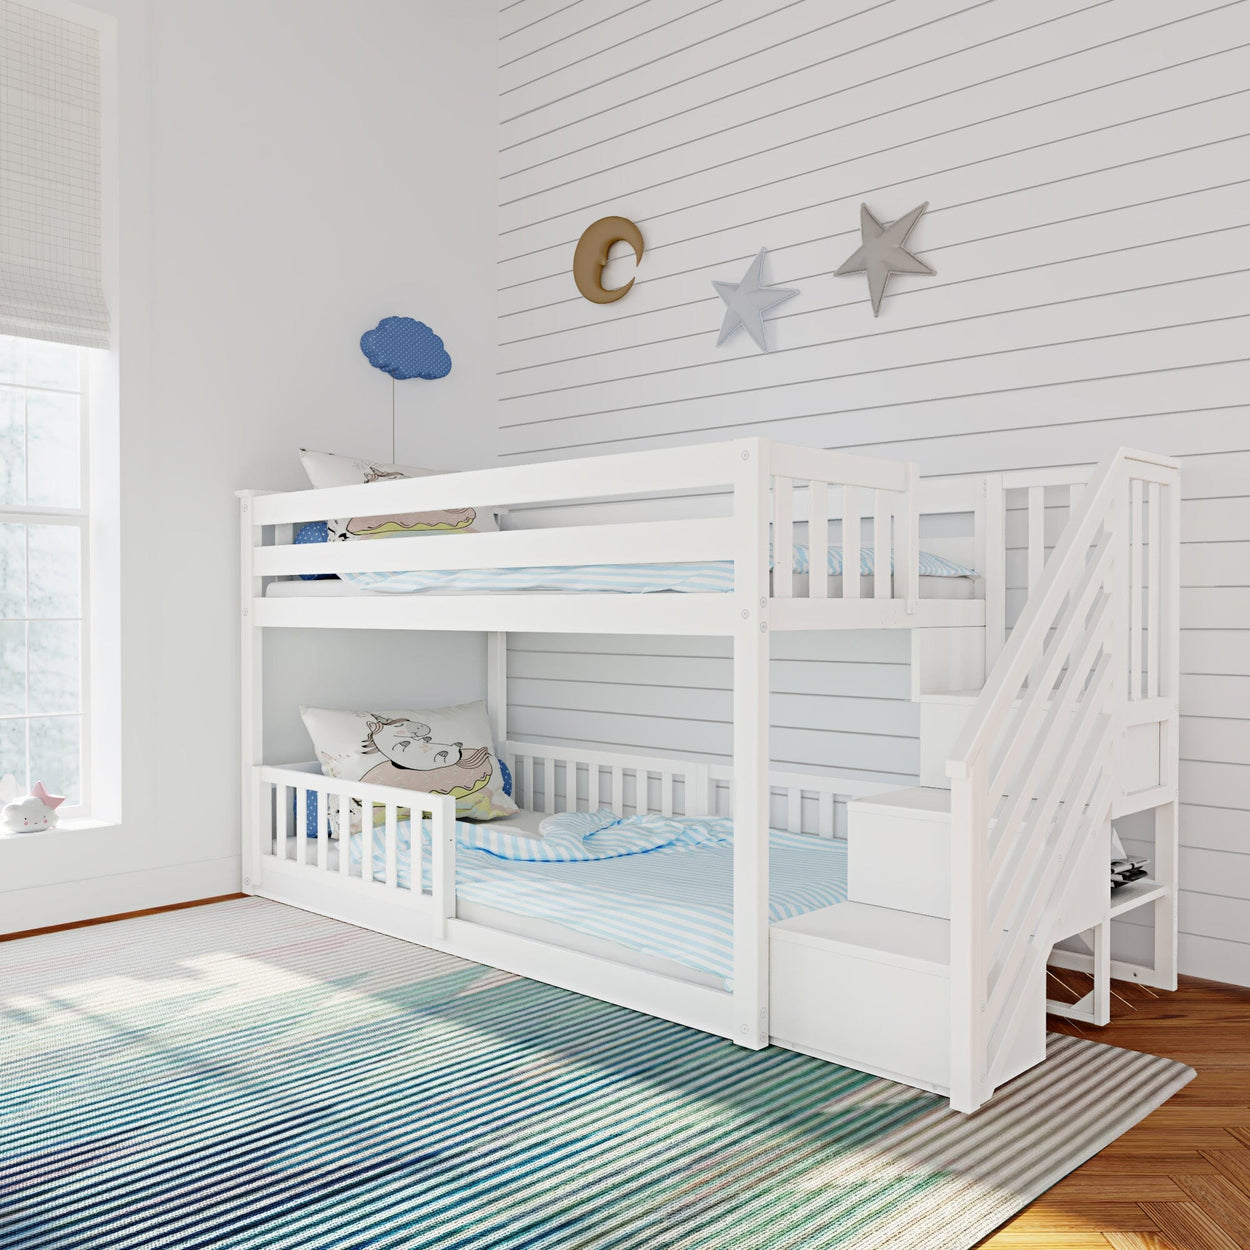 185220002309 : Bunk Beds Low Bunk with Stairs and Three Guard Rails, White